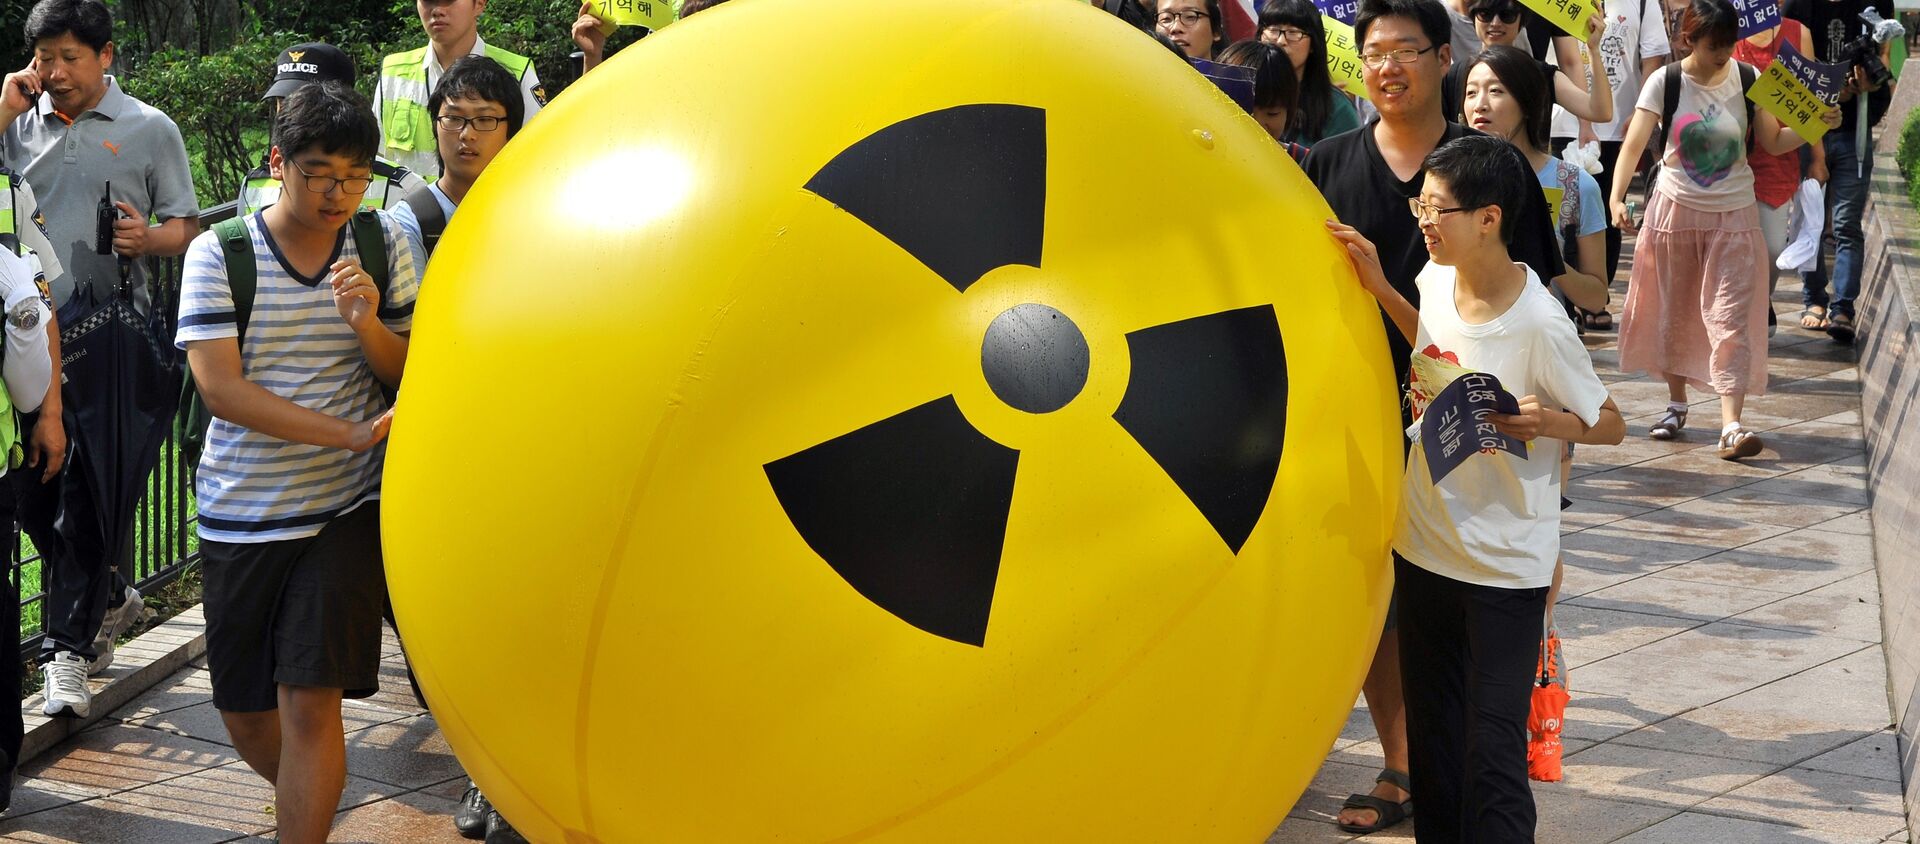 South Korean activists march while rolling a large balloon with a radioactivity warning sign during an anti-nuclear protest in Seoul on August 6, 2013 on the 68th anniversary of the atomic bombing of Hiroshima in Japan - Sputnik International, 1920, 20.04.2021